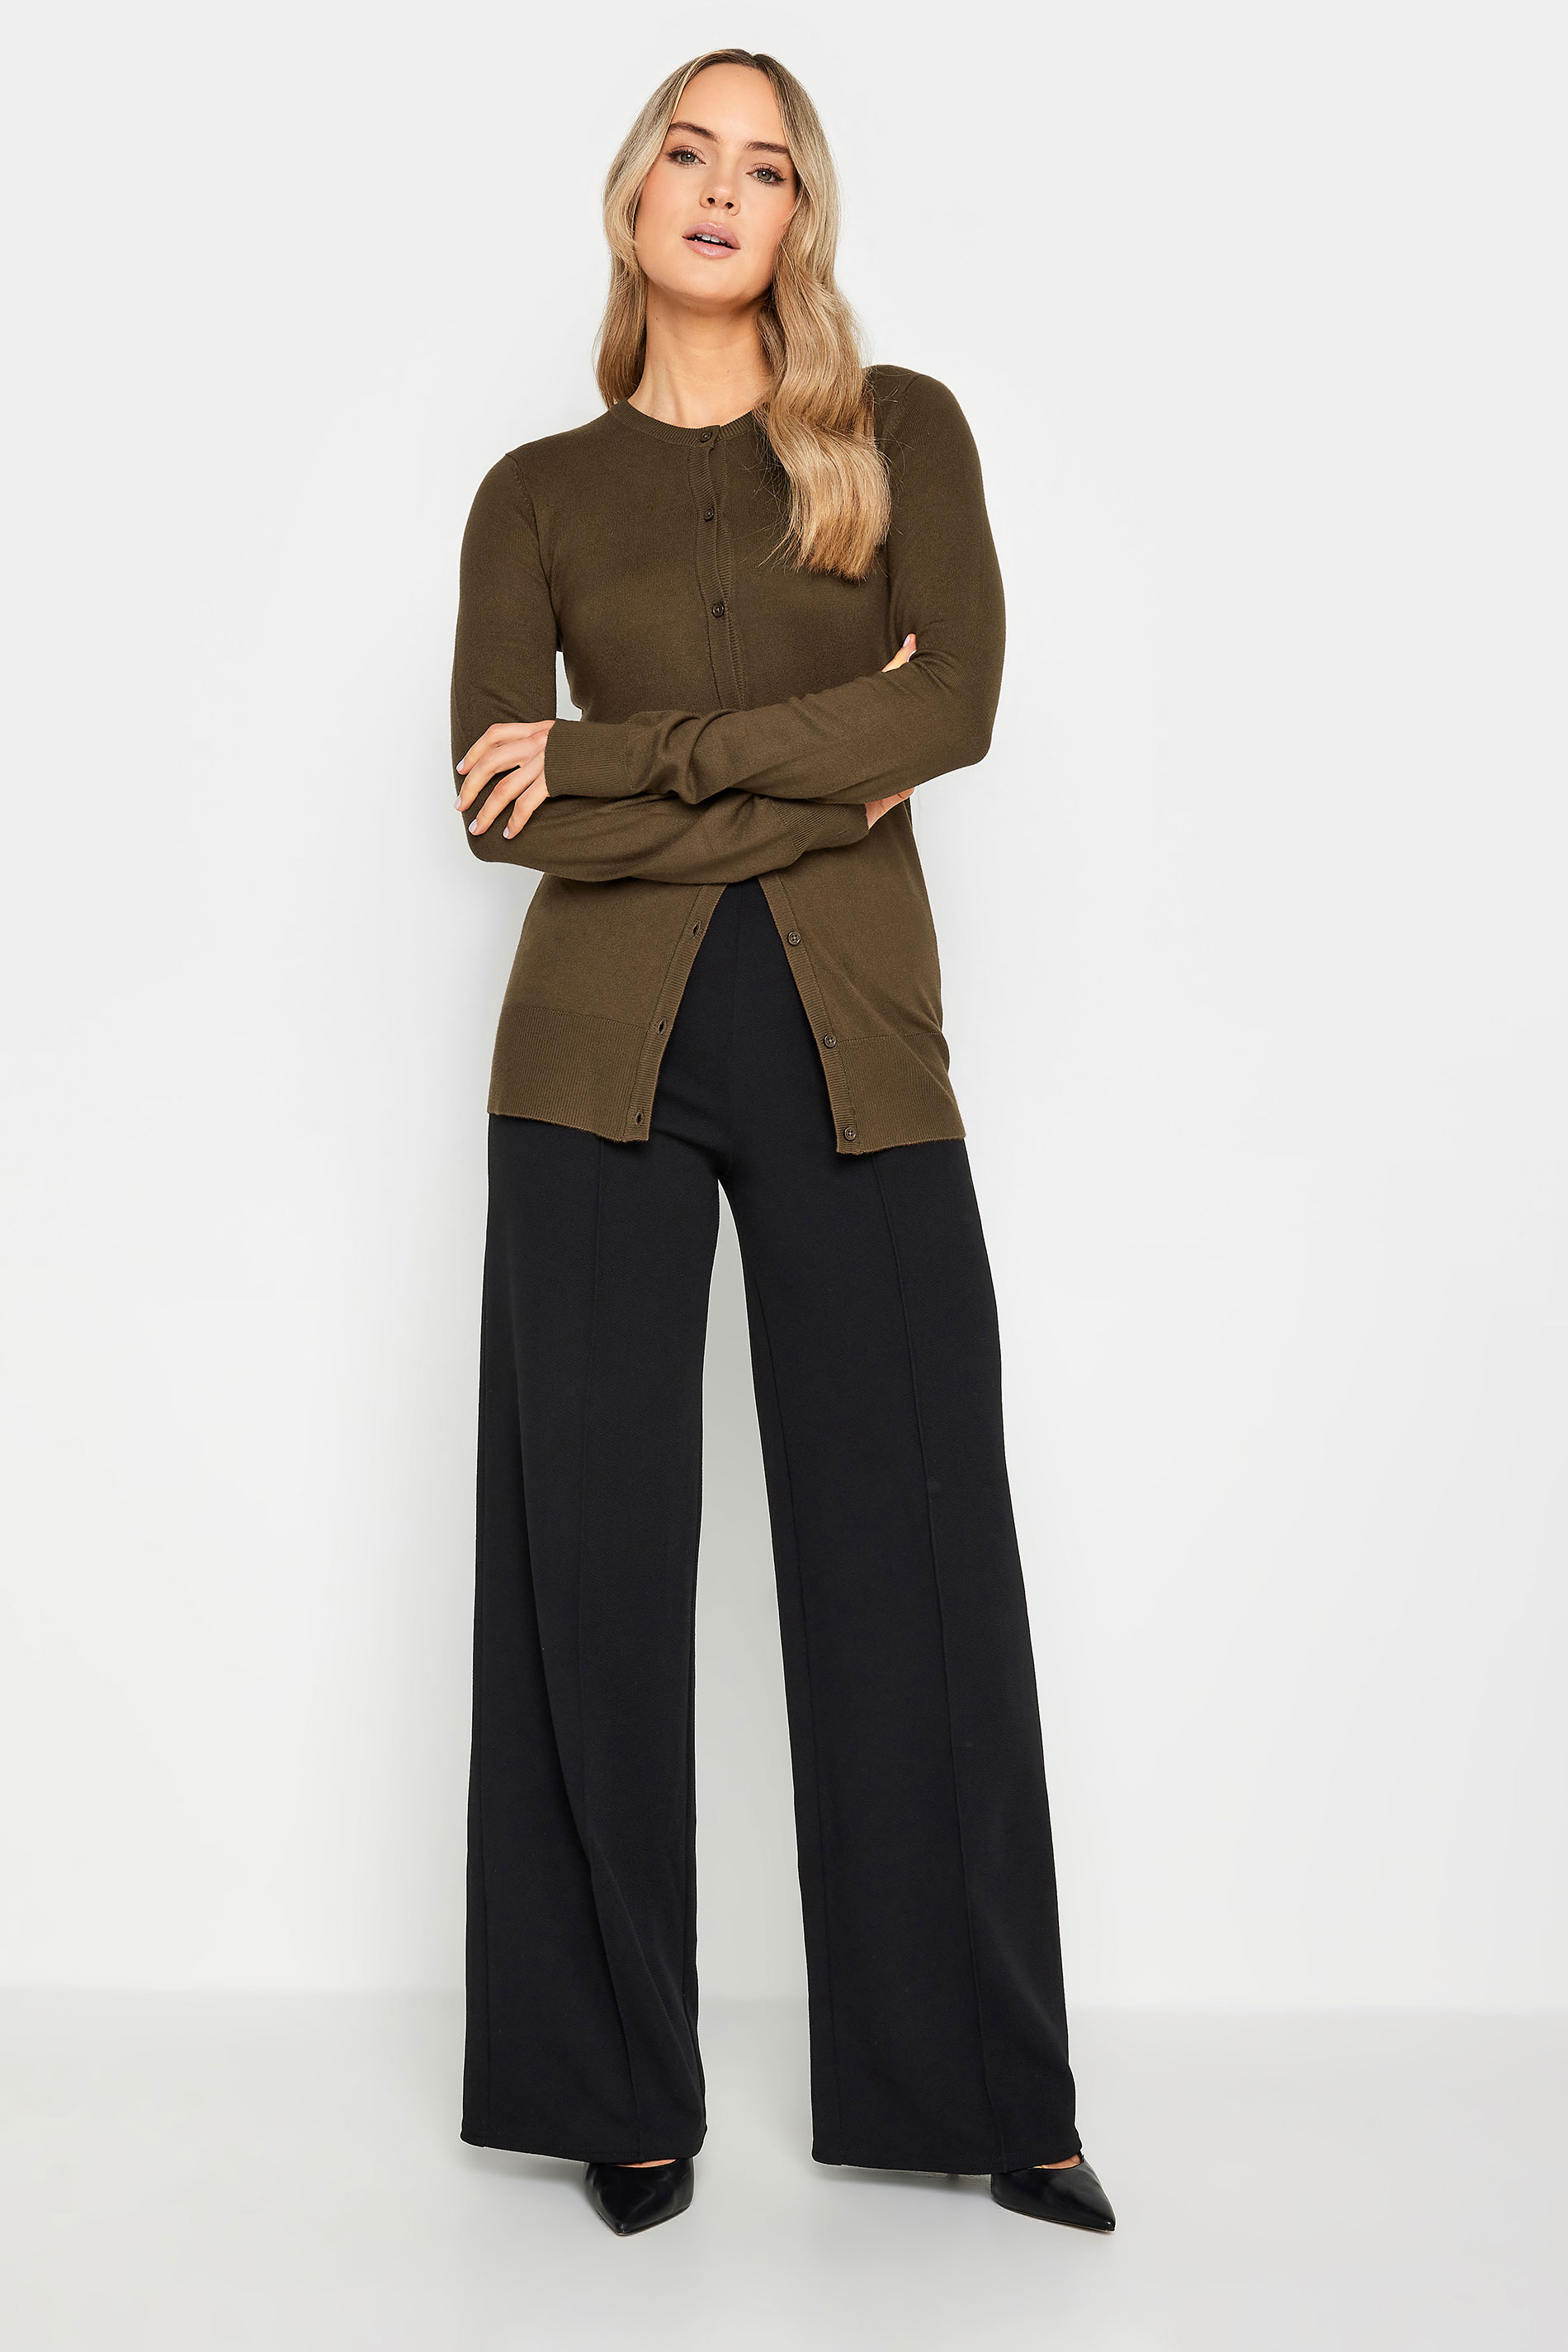 LTS Tall Chocolate Brown Button Down Knit Cardigan | Long Tall Sally  3